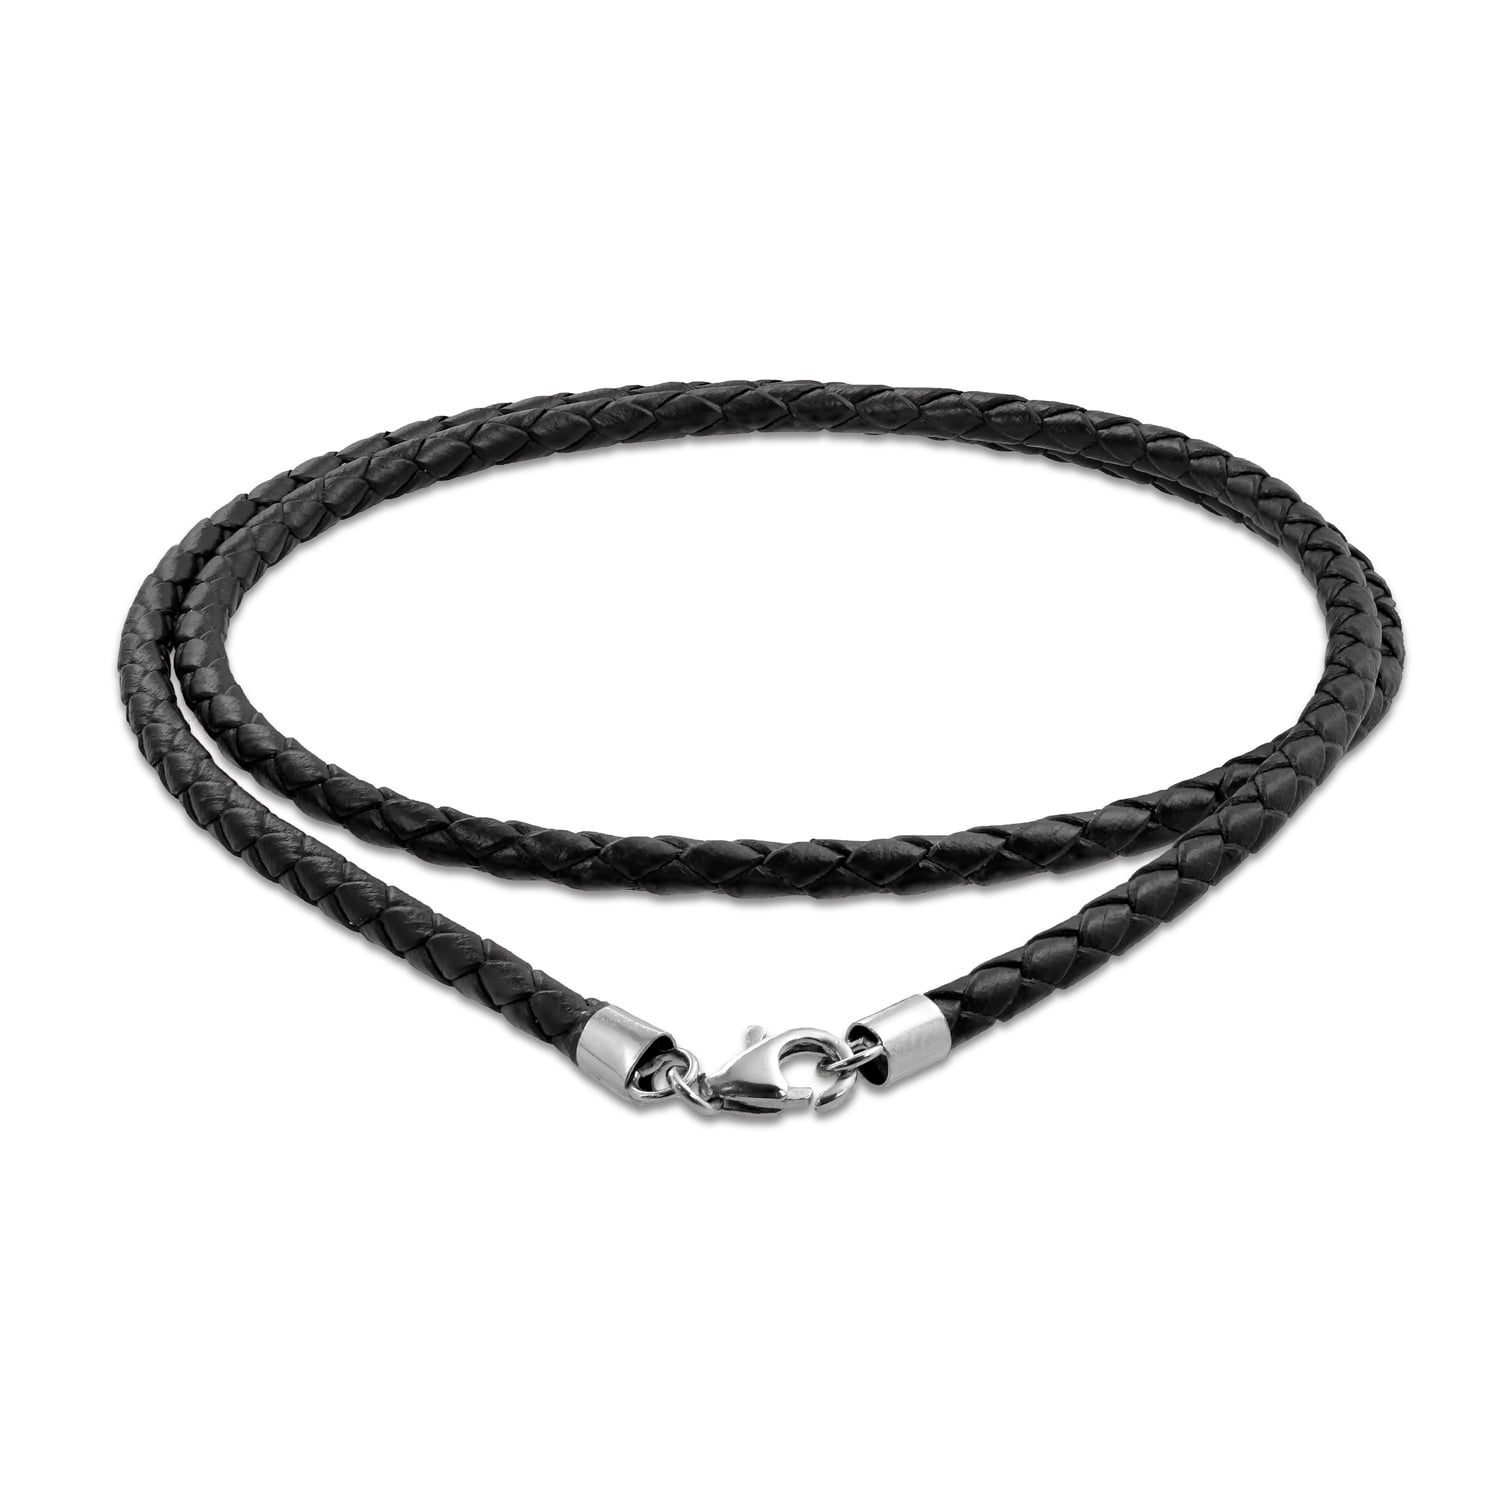 Richsteel Men Women Black/Brown Braided Wax Rope Necklace 2/3mm Wide 16”18 20 22 24 26 28 30 Length Leather Necklace with Stainless Steel Clasp Waterproof 